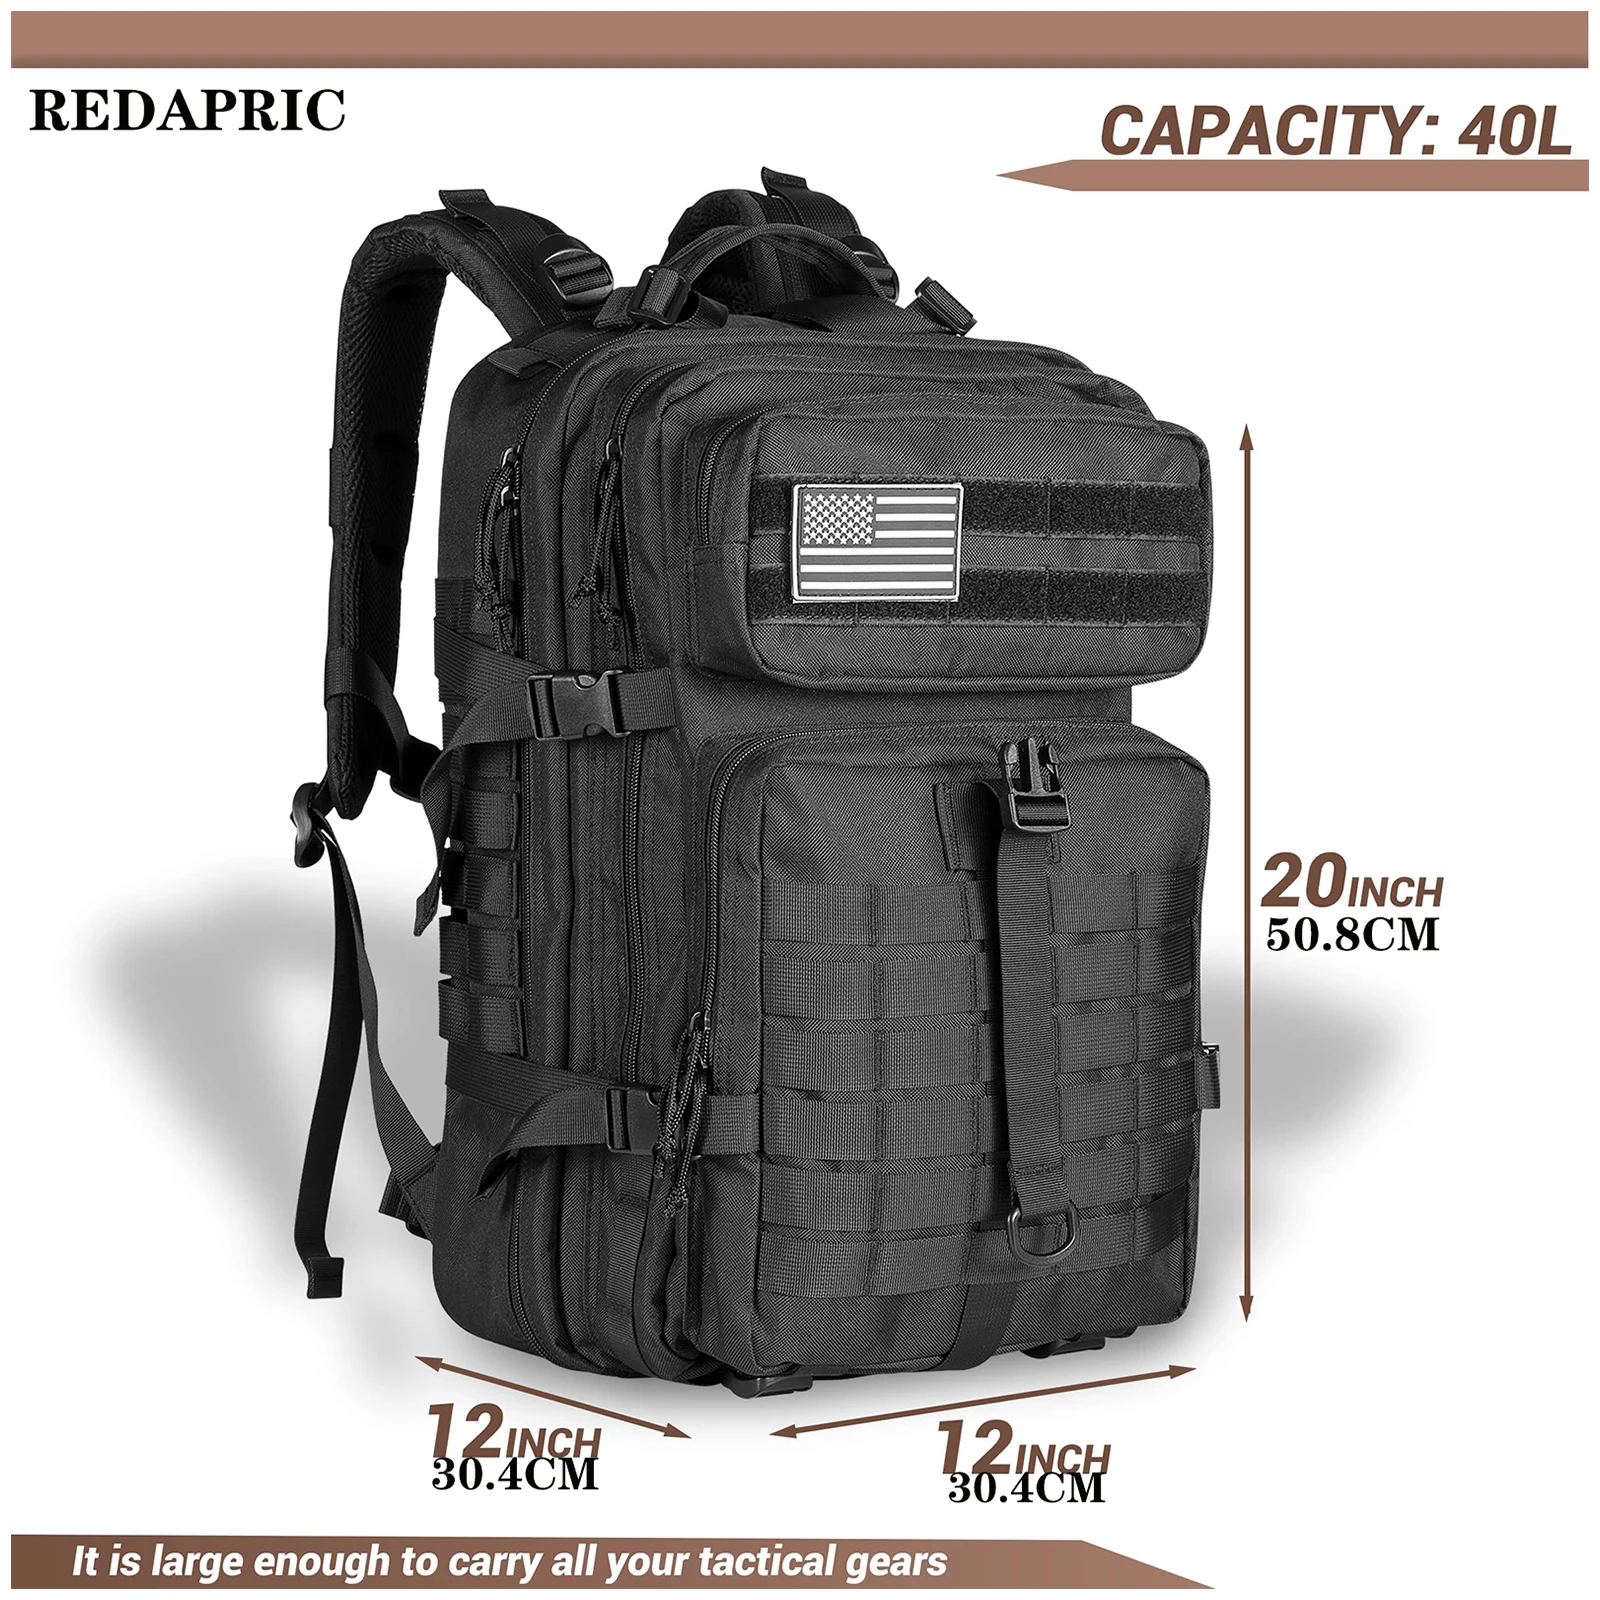 45L Tactical Backpack 3 Day Assault Pack Outdoor Bug Out Bag Military Style for Trekking Camping Fishing Hiking